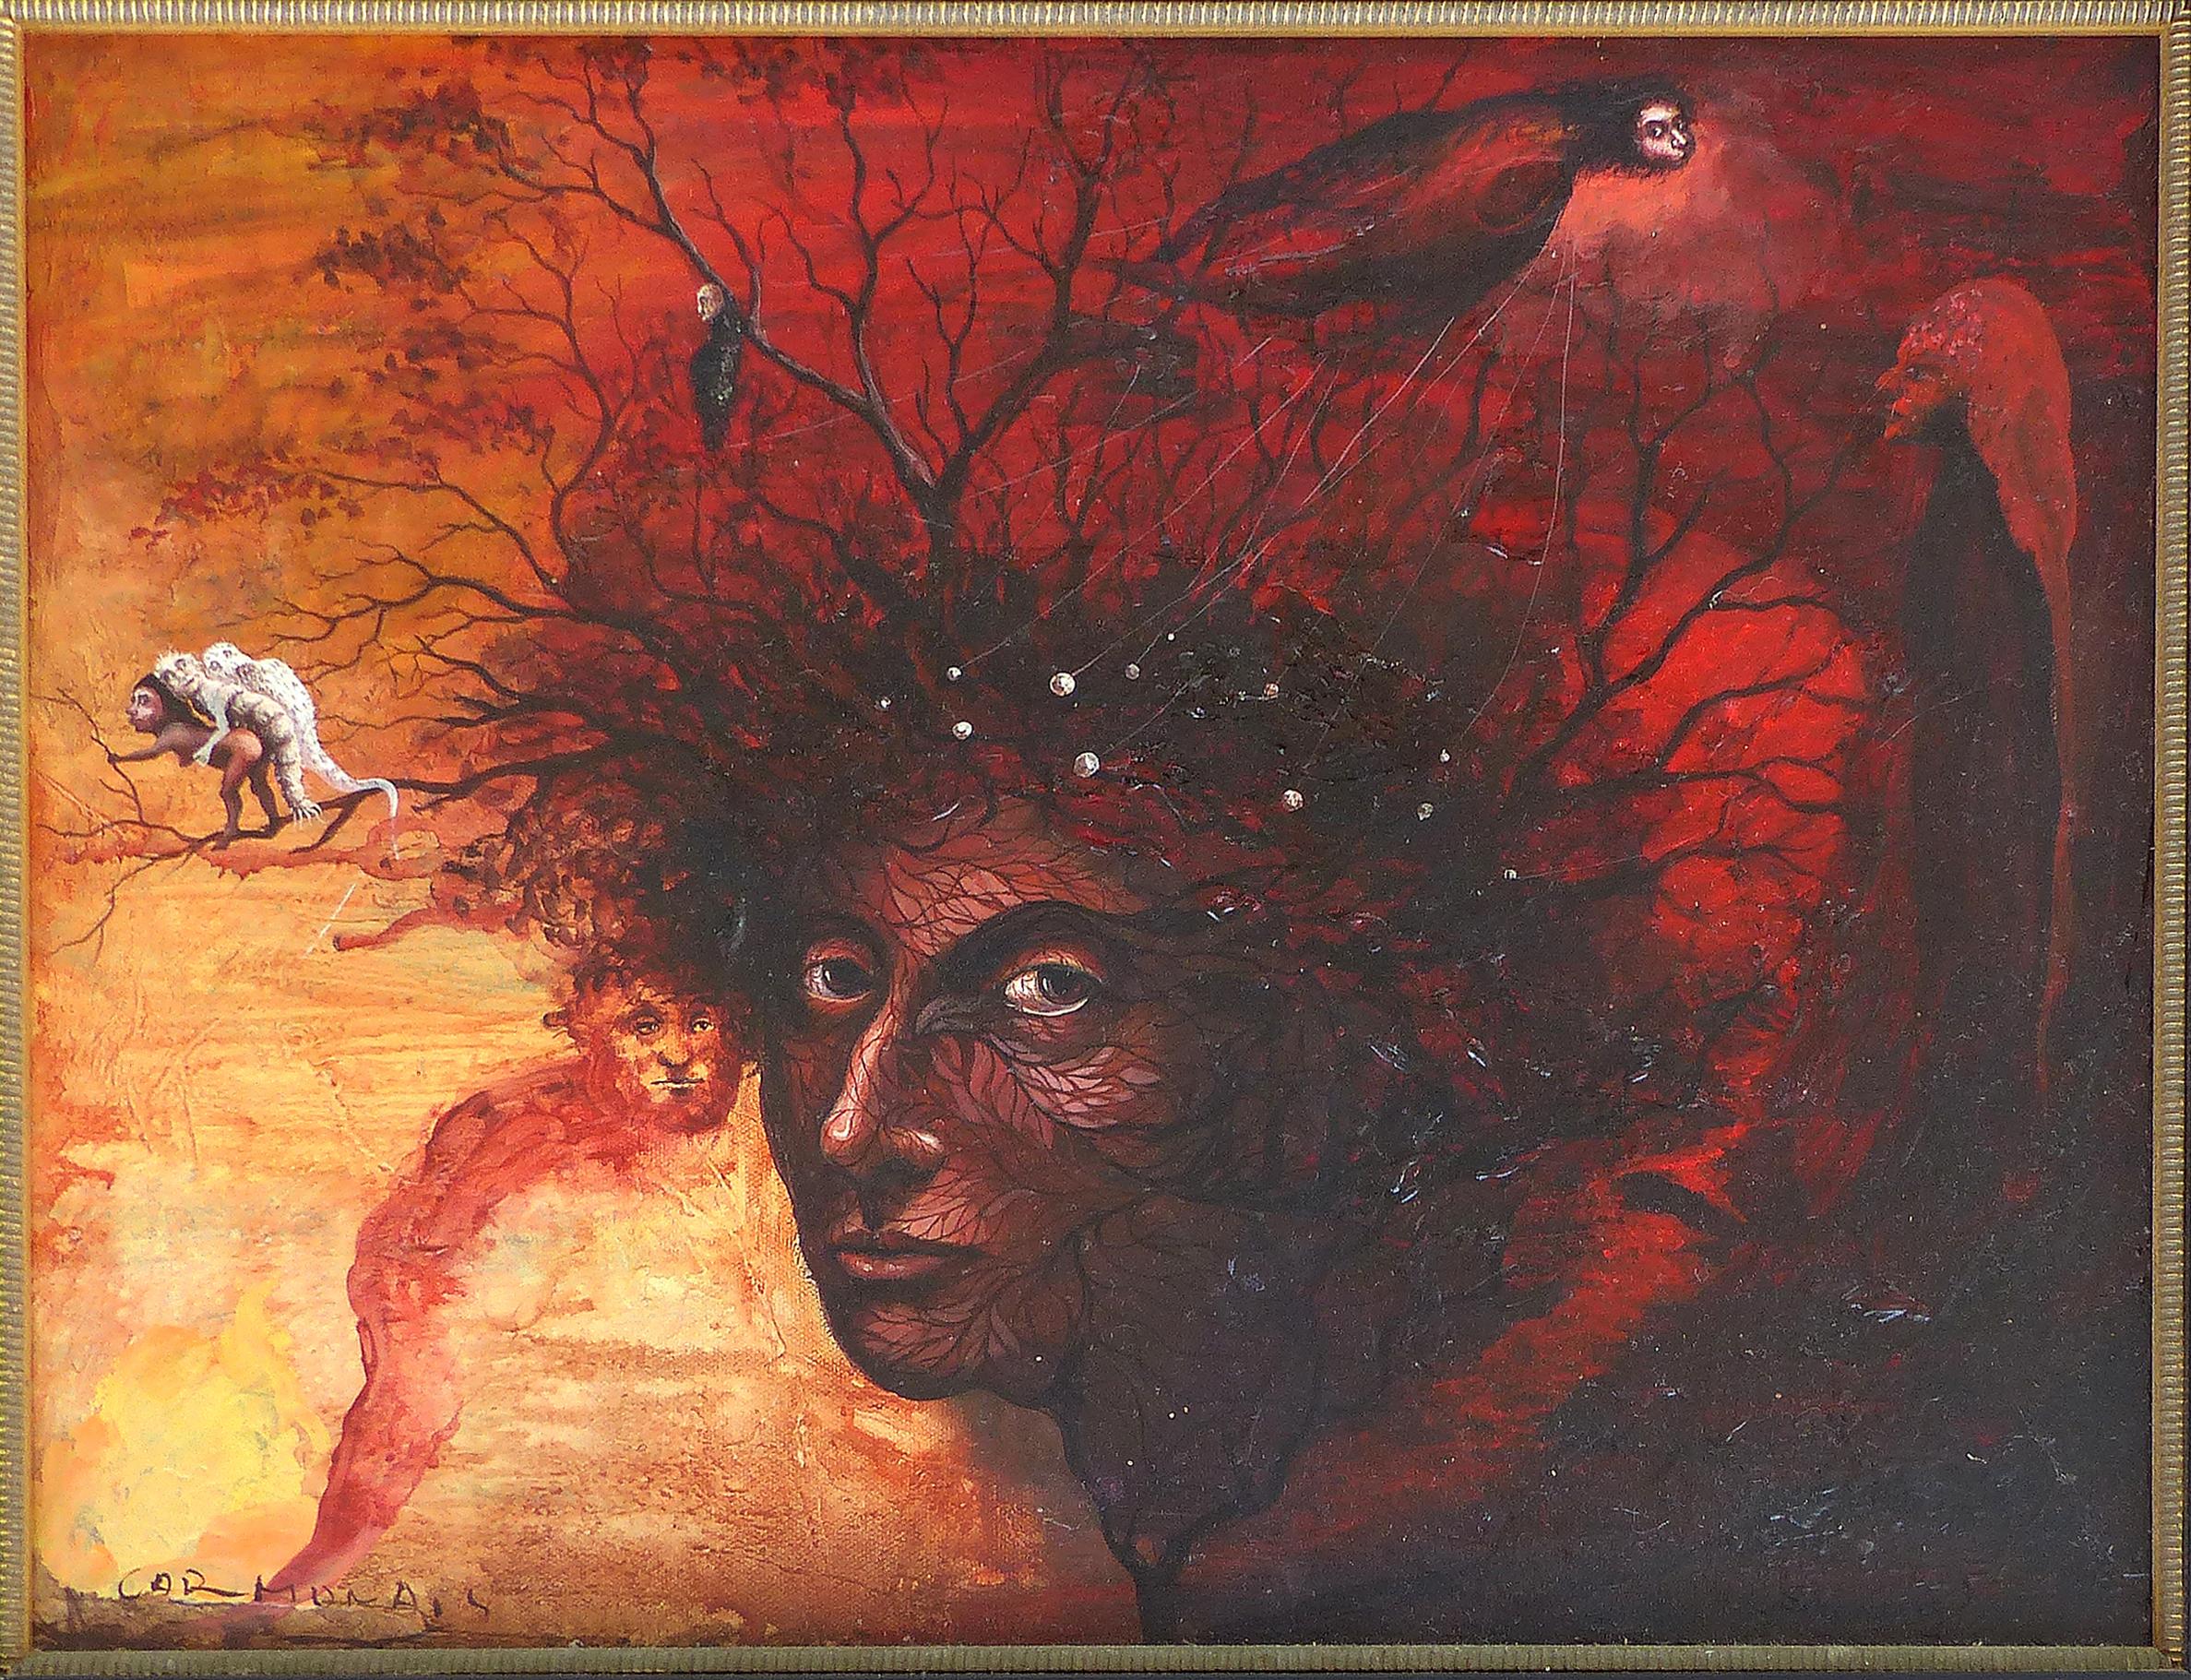 Williams Carmona Surrealist Oil Painting on Canvas,  Cuban/ Puerto Rican Artist 

Offered for sale is a figurative oil on canvas by Cuban born artist Williams Carmona. This painting is framed in a dark wood frame with a giltwood liner, is wired and